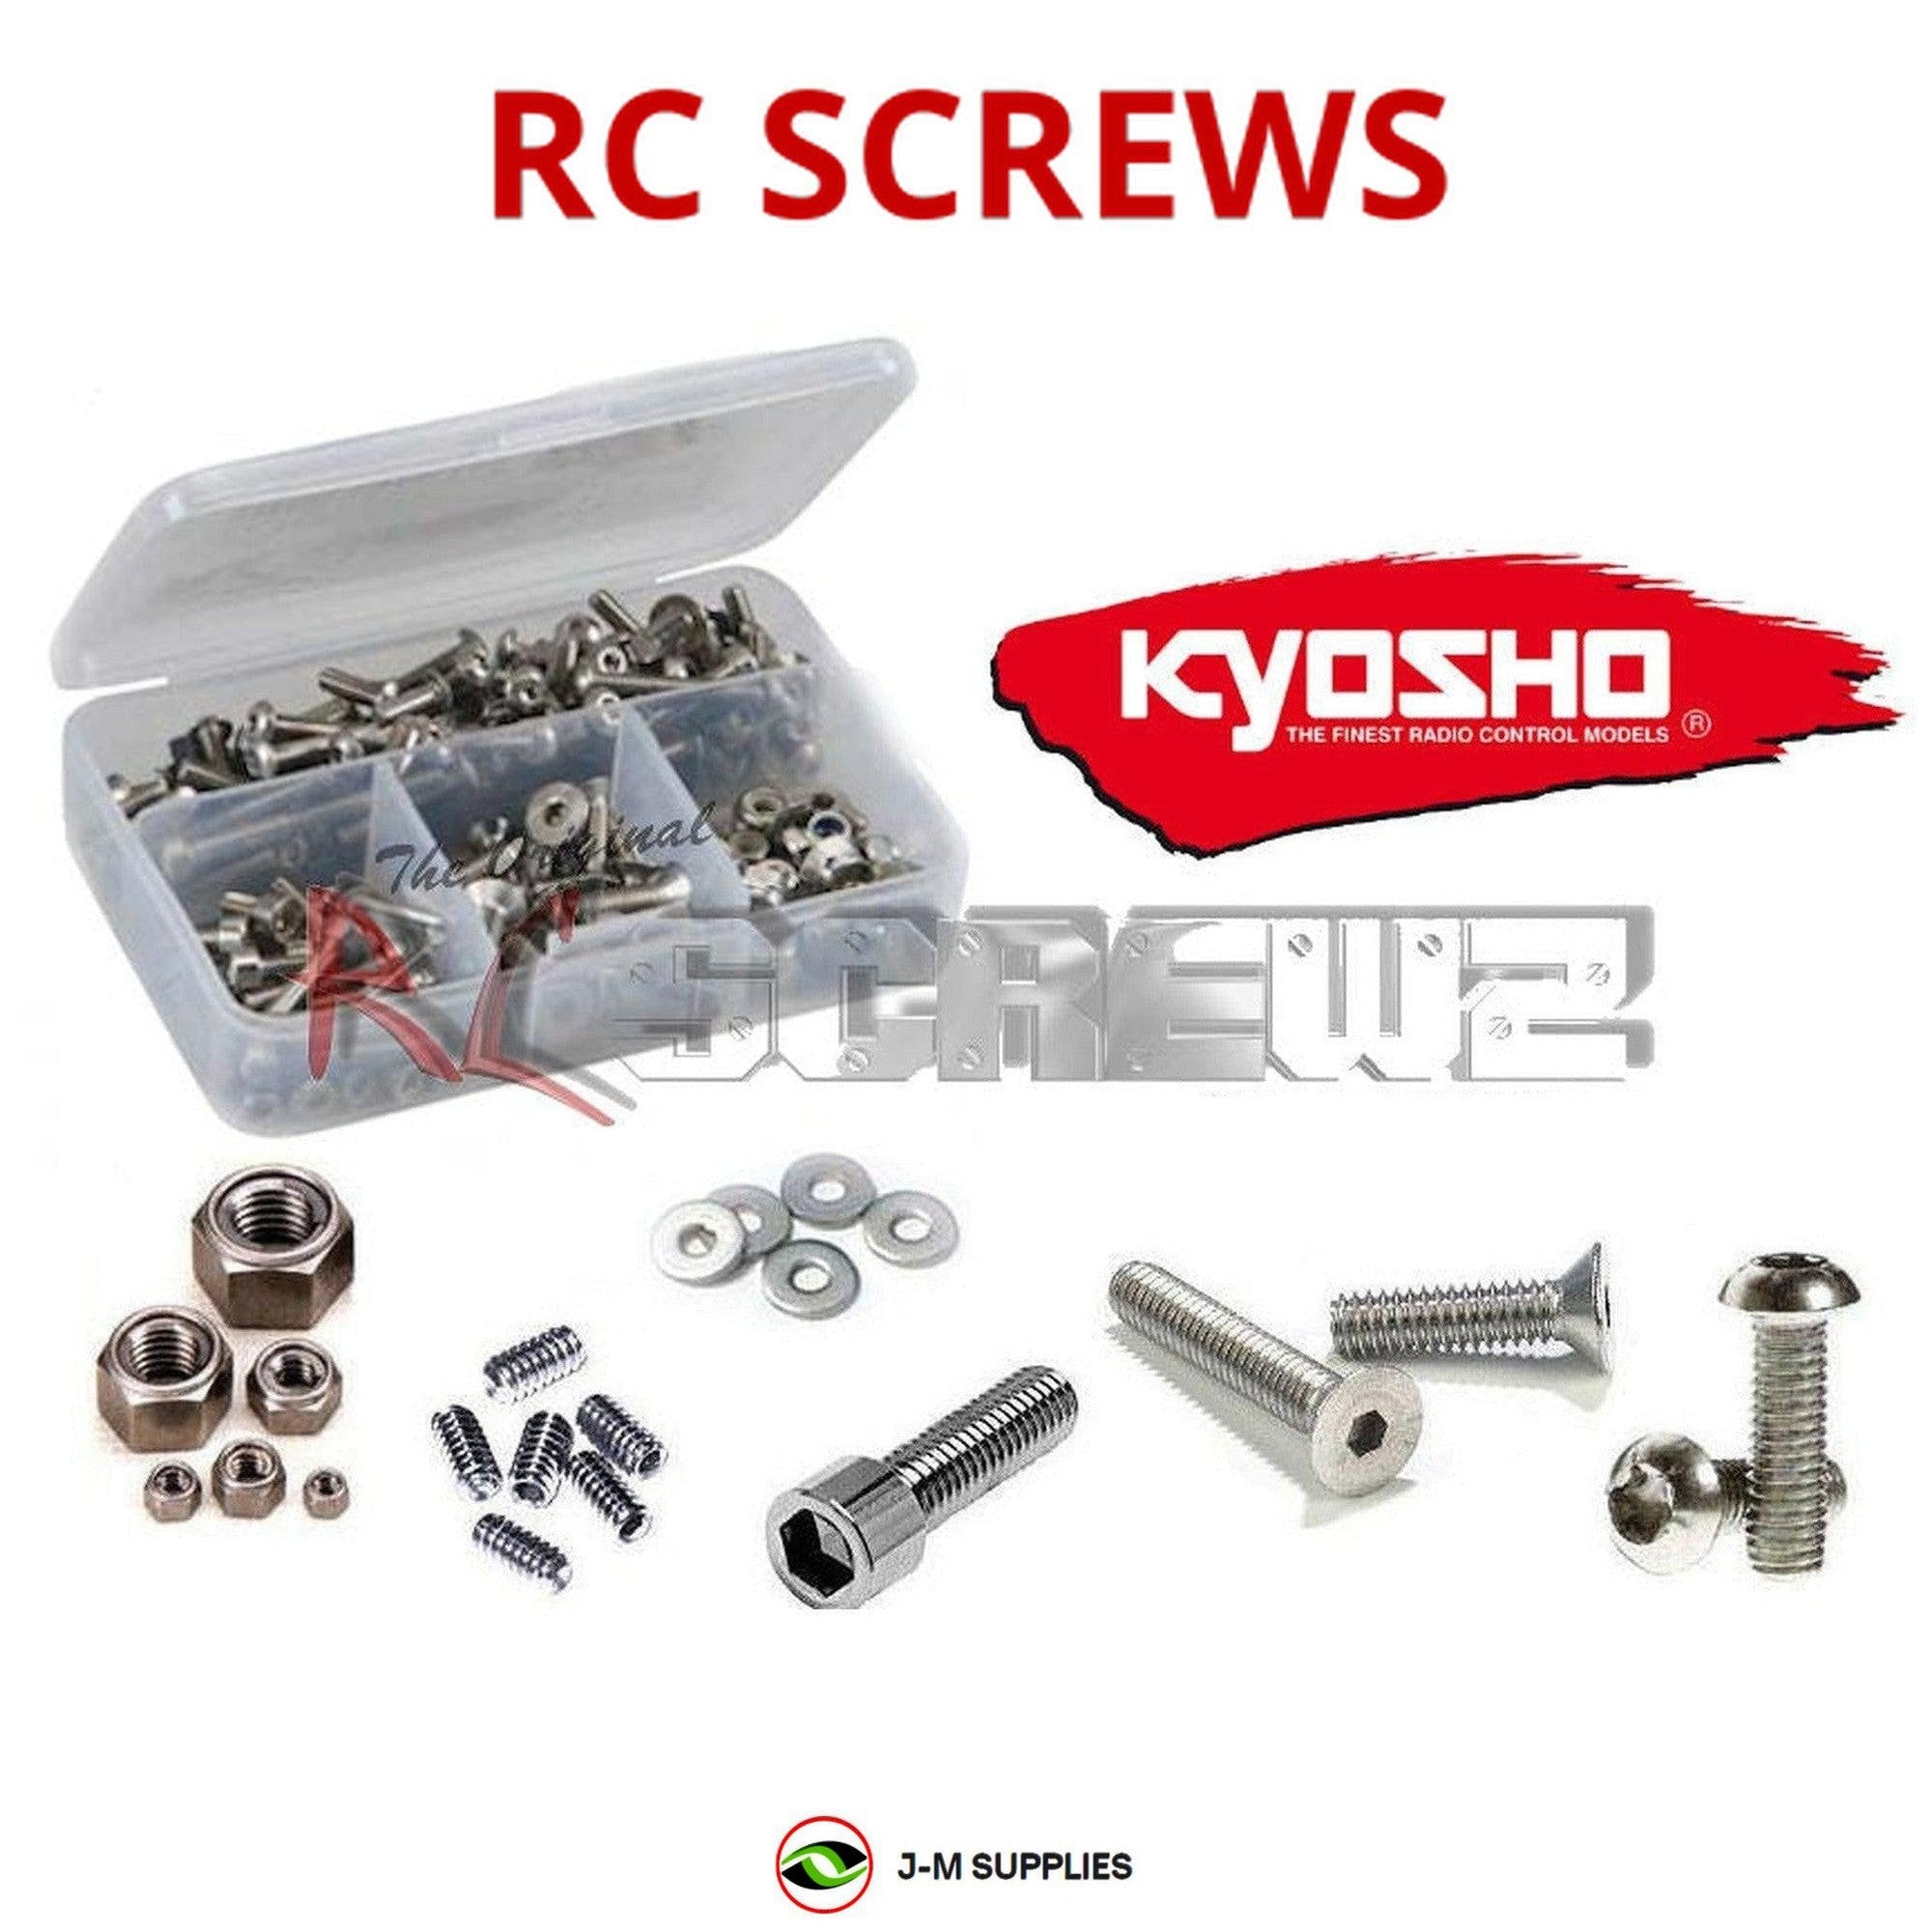 RCScrewZ Stainless Screw Kit+ kyo033 for Kyosho Progress 4WDS #3067 | PRO - Picture 1 of 12